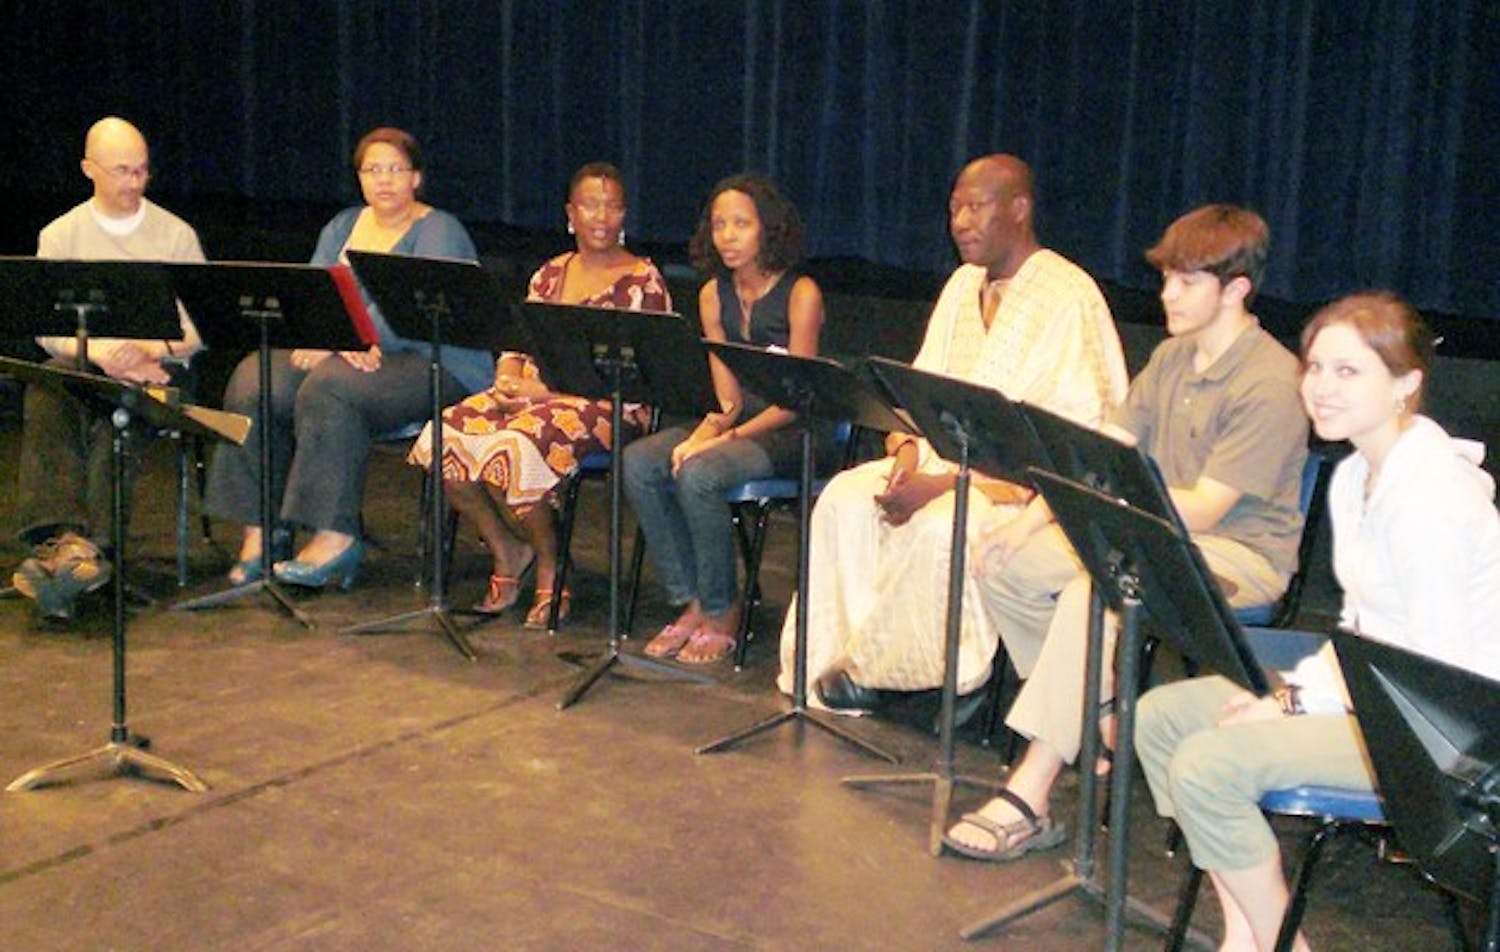 On Sunday night, students, guest artists and actors performed a dramatic reading of Charles Mulekwa's introspective 